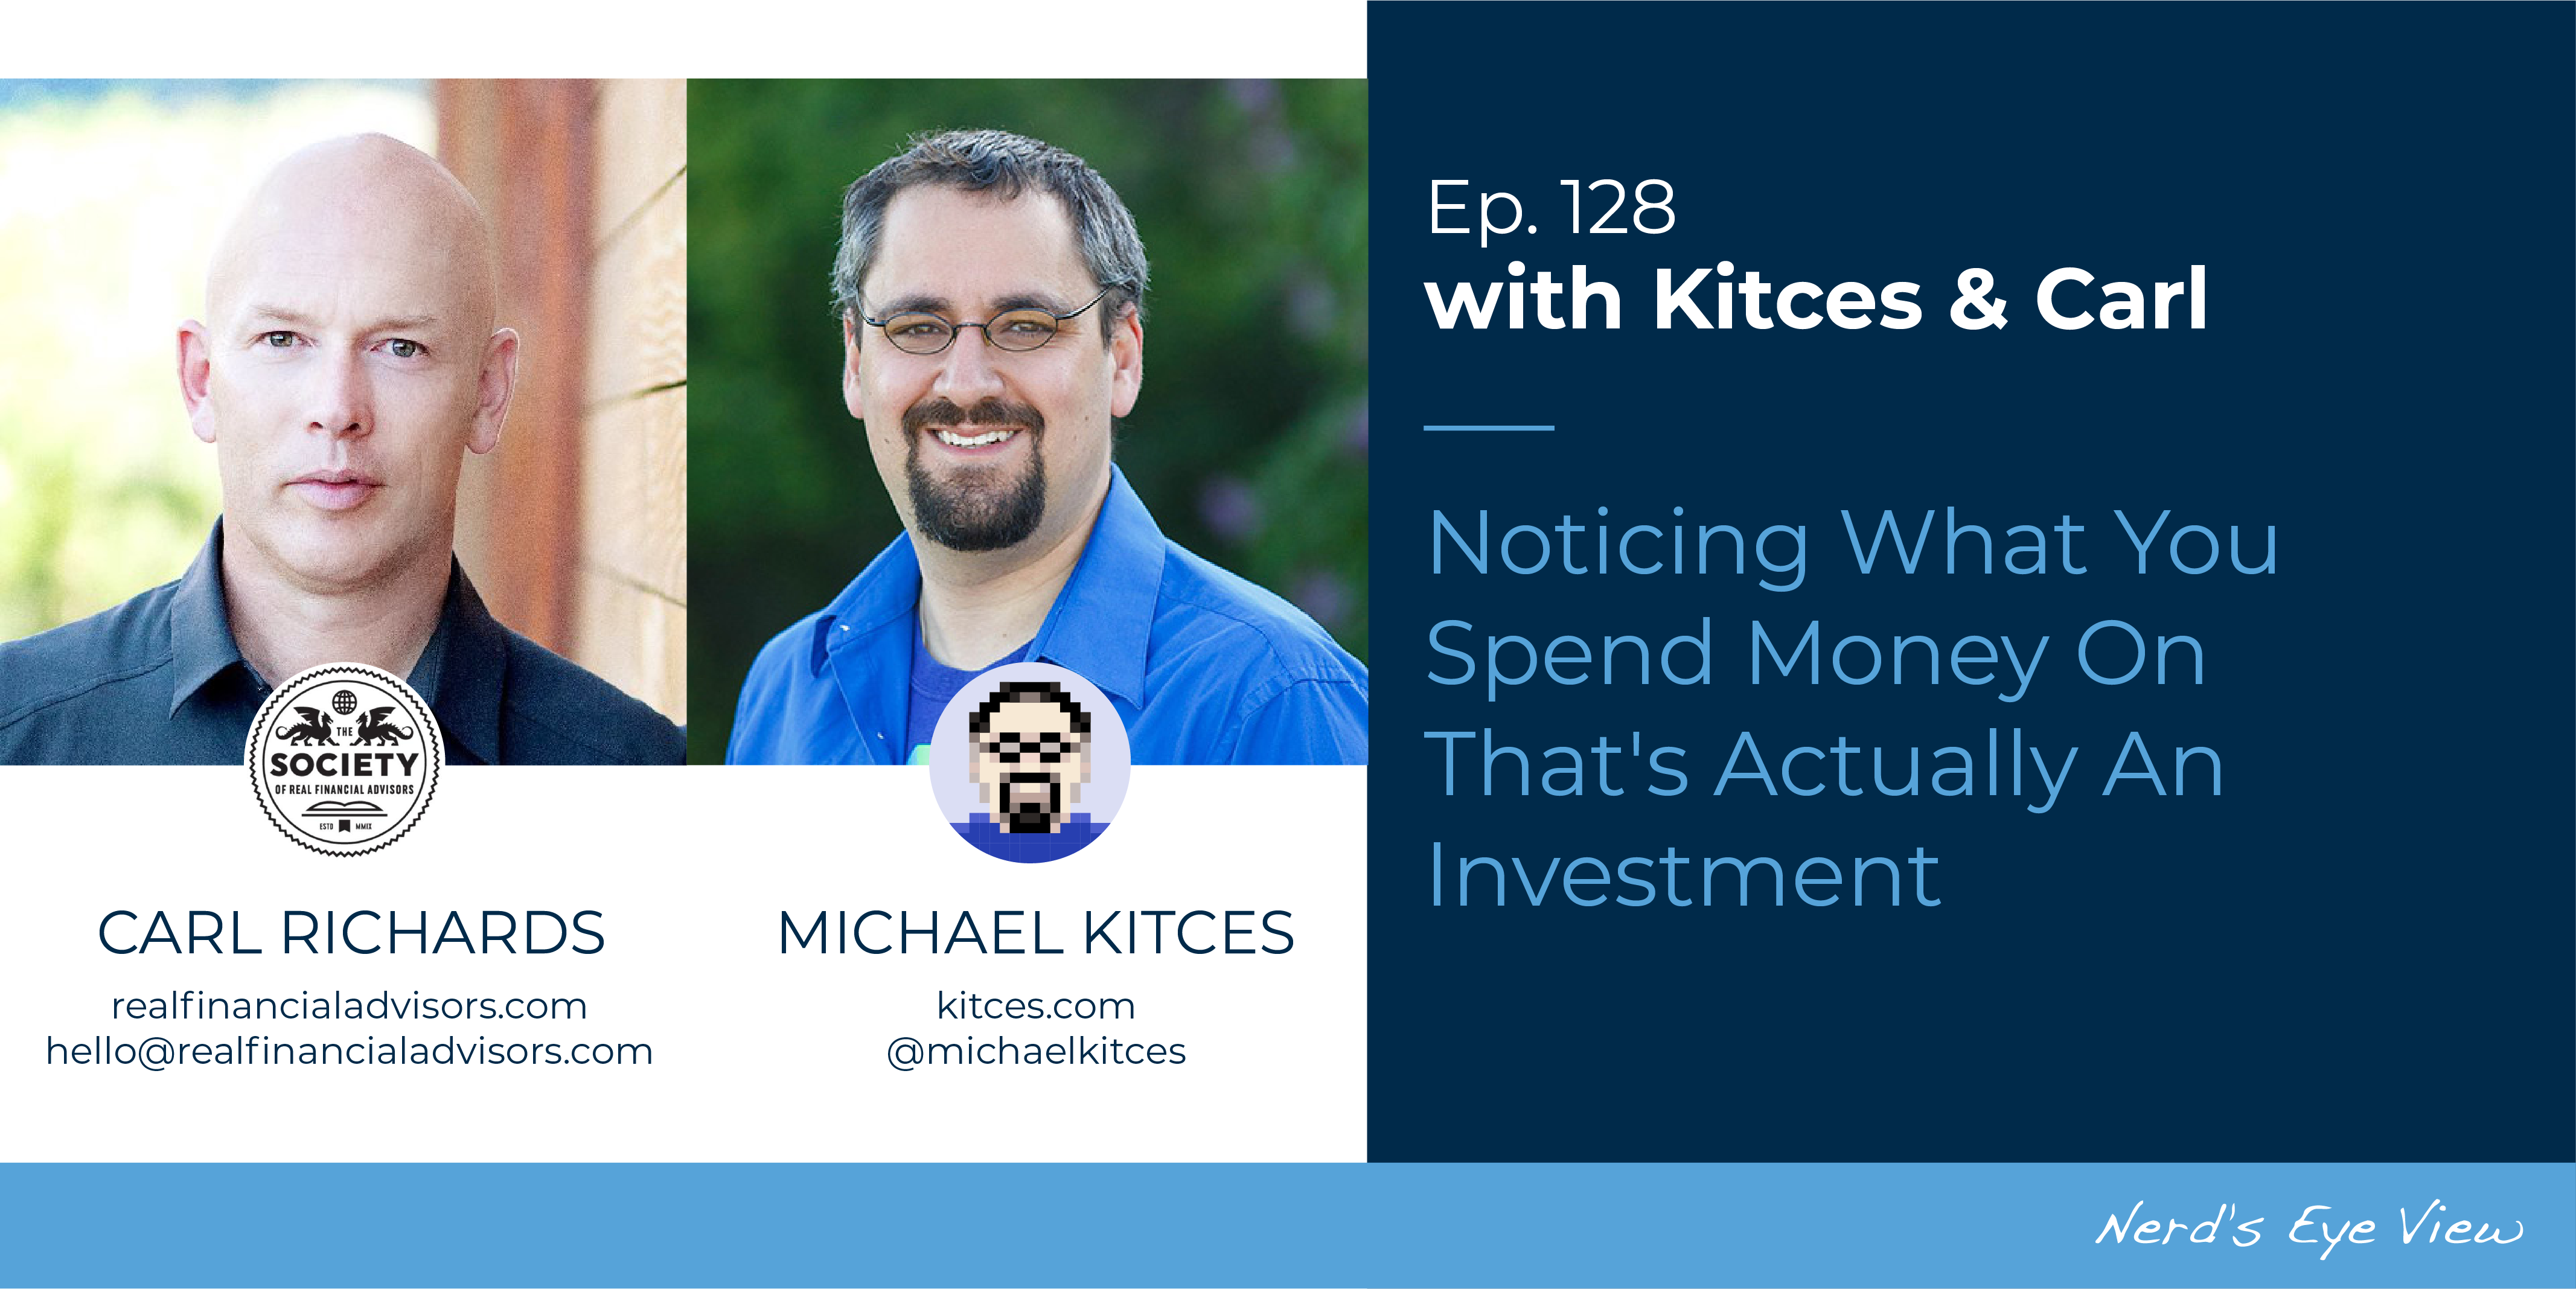 Kitces & Carl Ep 128: Noticing What You Spend Cash On That’s Truly An Funding